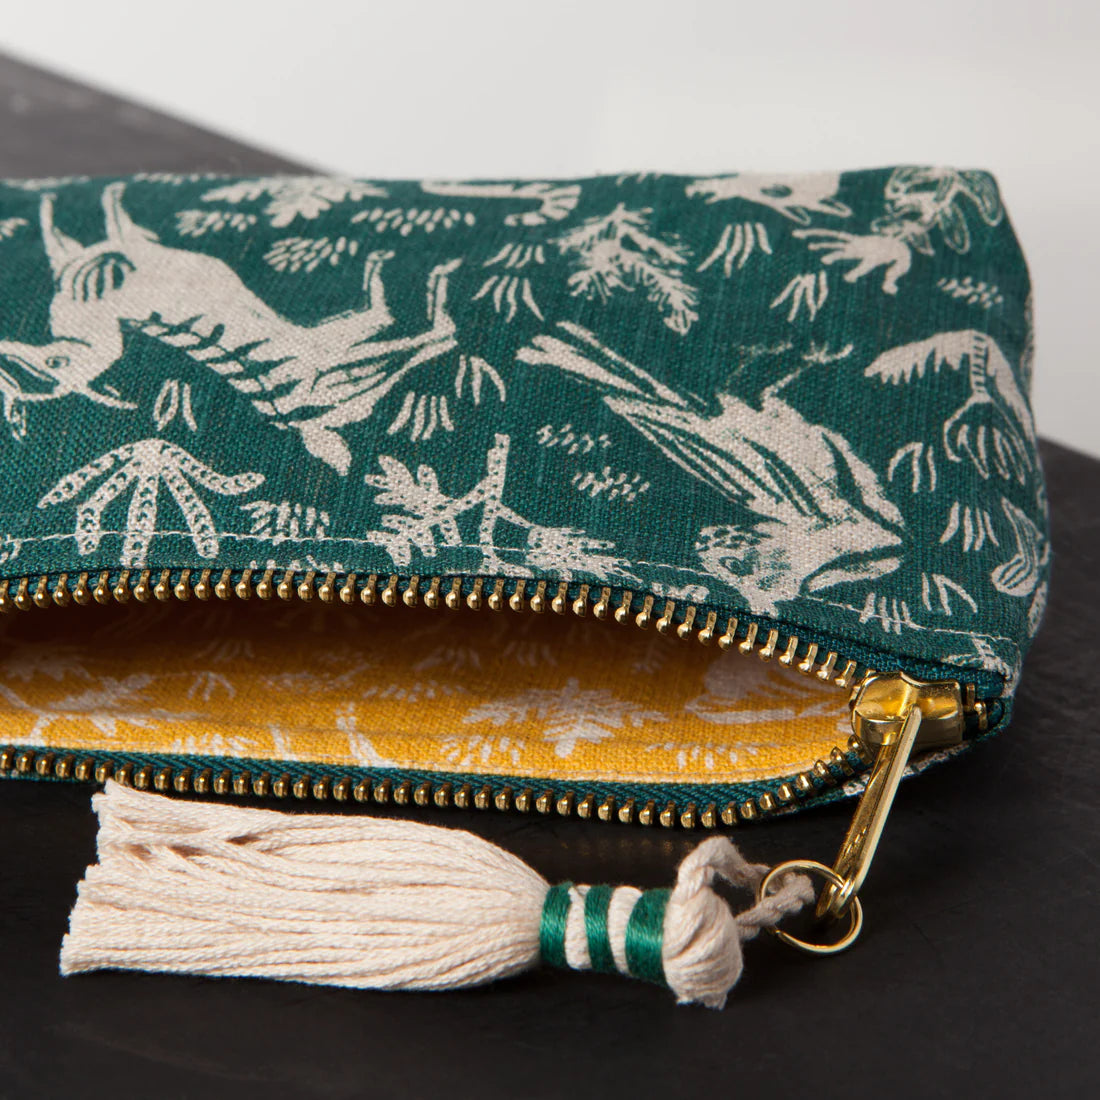 Cosmetic Bag/Pencil Case - Boundless